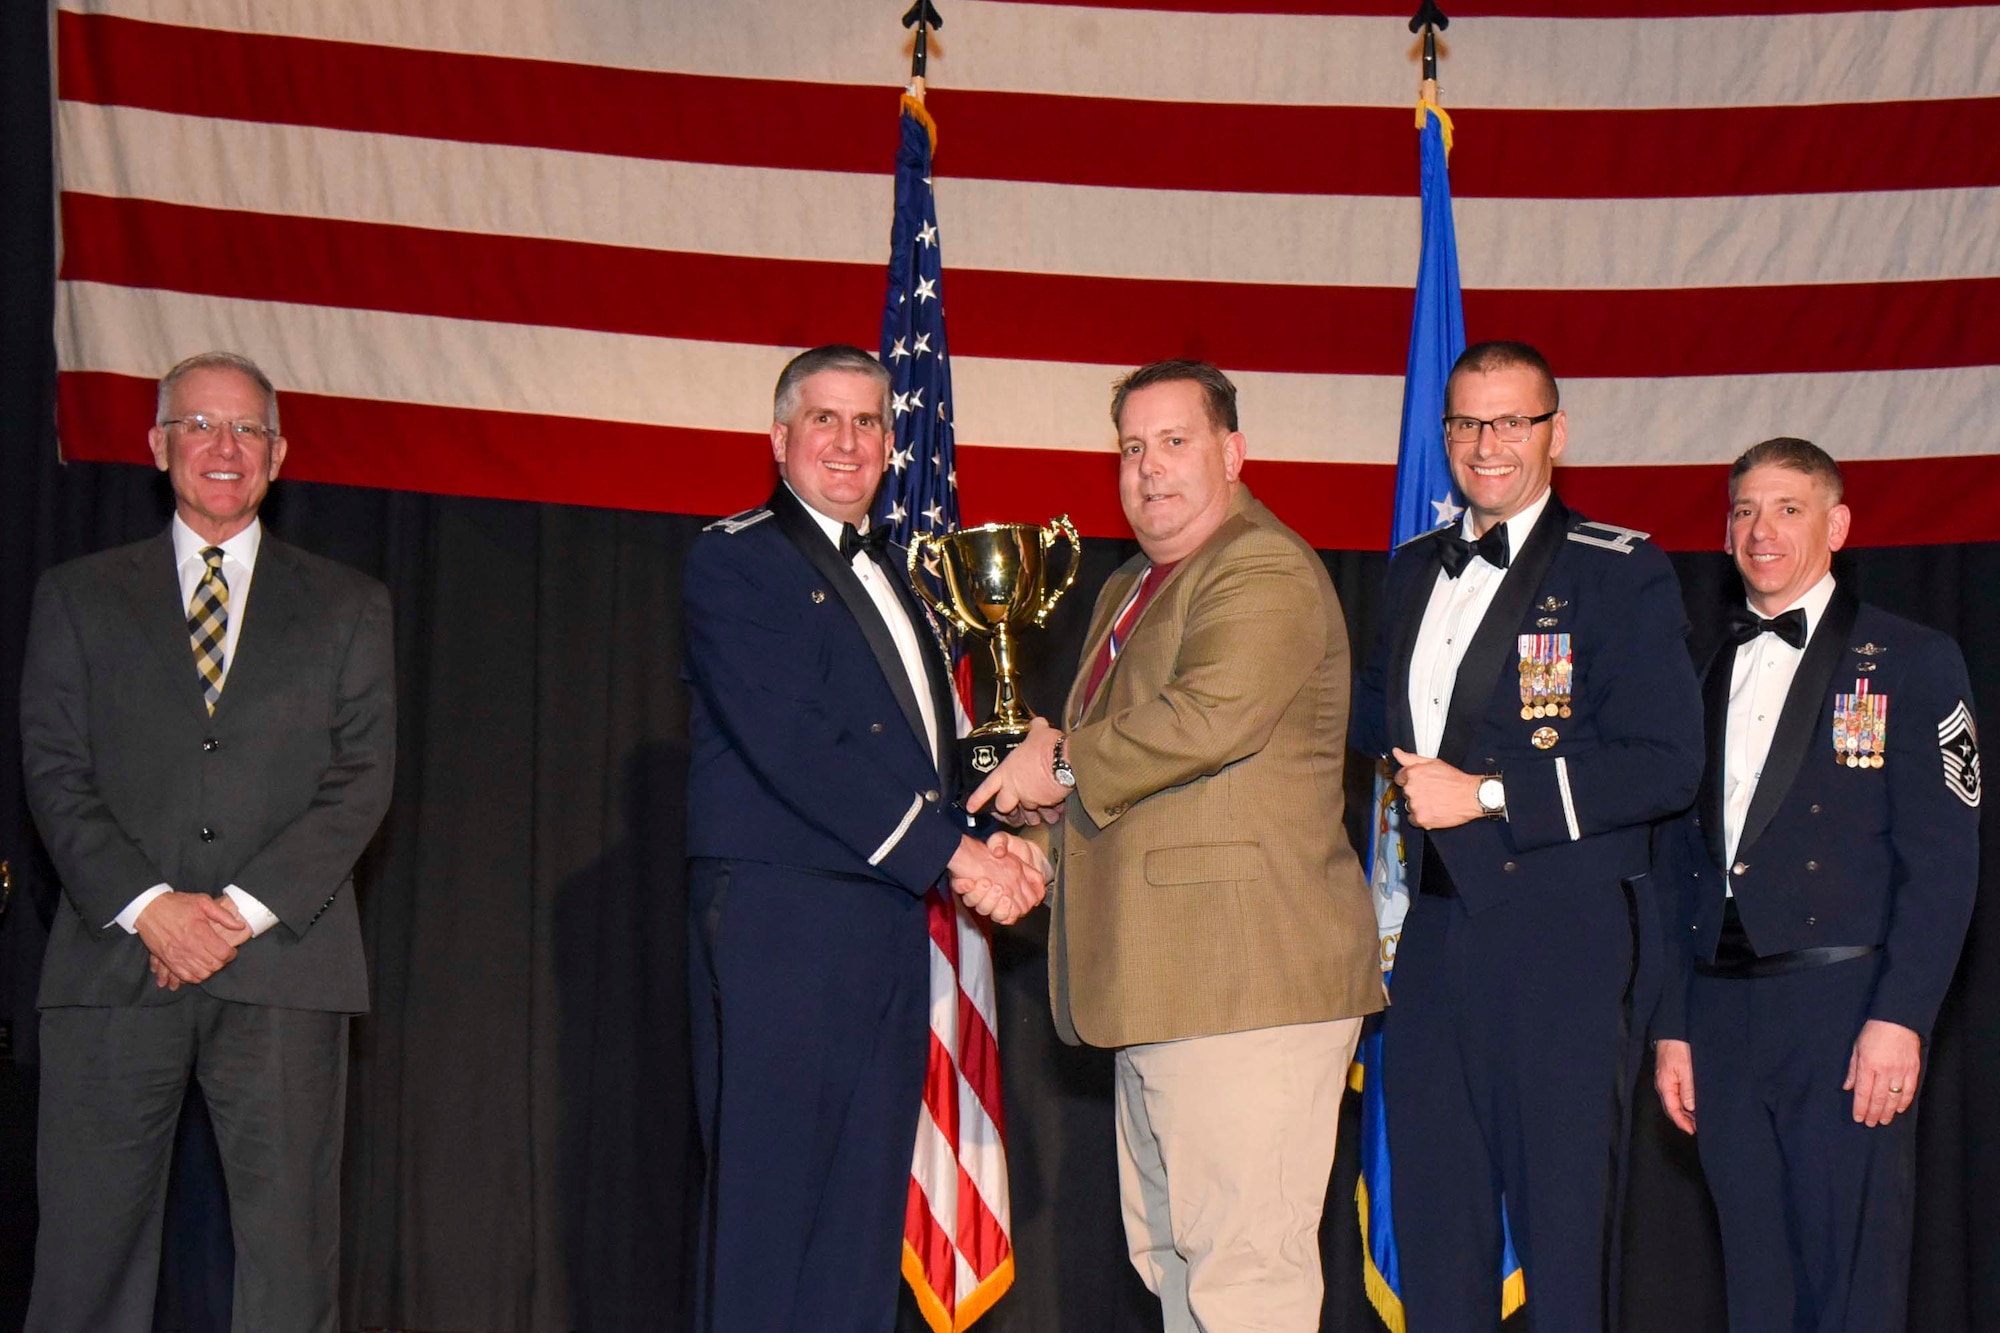 Stephen J. Yavornitzki, 22nd Wing Staff Agencies, center, accepts the 2016 Civilian Category II of the Year award, Feb. 3, 2017, at McConnell Air Force Base, Kan. The annual awards ceremony recognized military and civilian members who excel in their areas of responsibilities, leadership qualities, community involvement, self-improvement and innovation from January to December 2016. (U.S. Air Force photo/Senior Airman Christopher Thornbury)